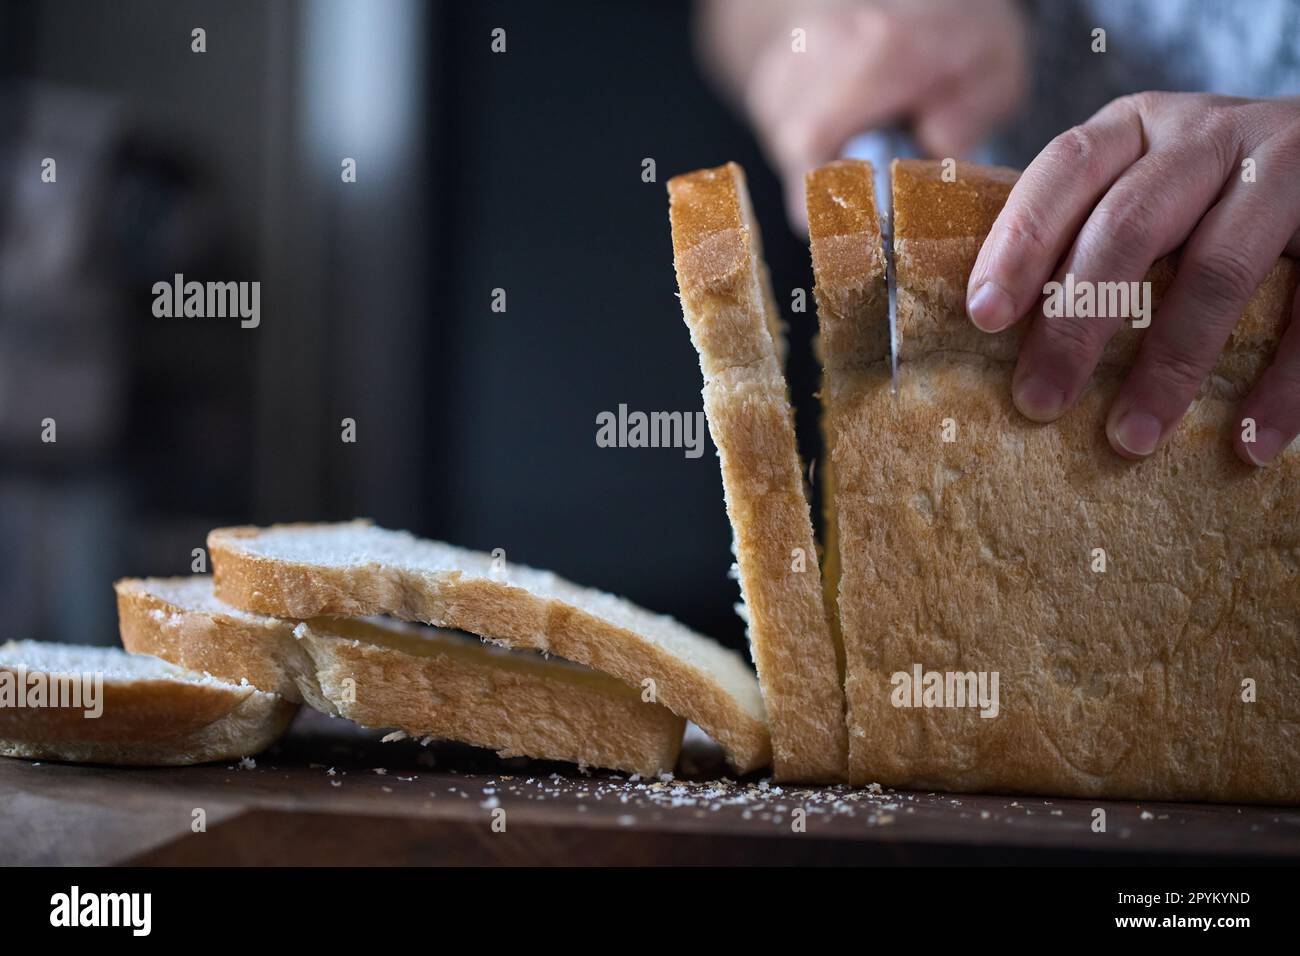 https://c8.alamy.com/comp/2PYKYND/cutting-whole-grain-loaf-with-bread-slicer-2PYKYND.jpg